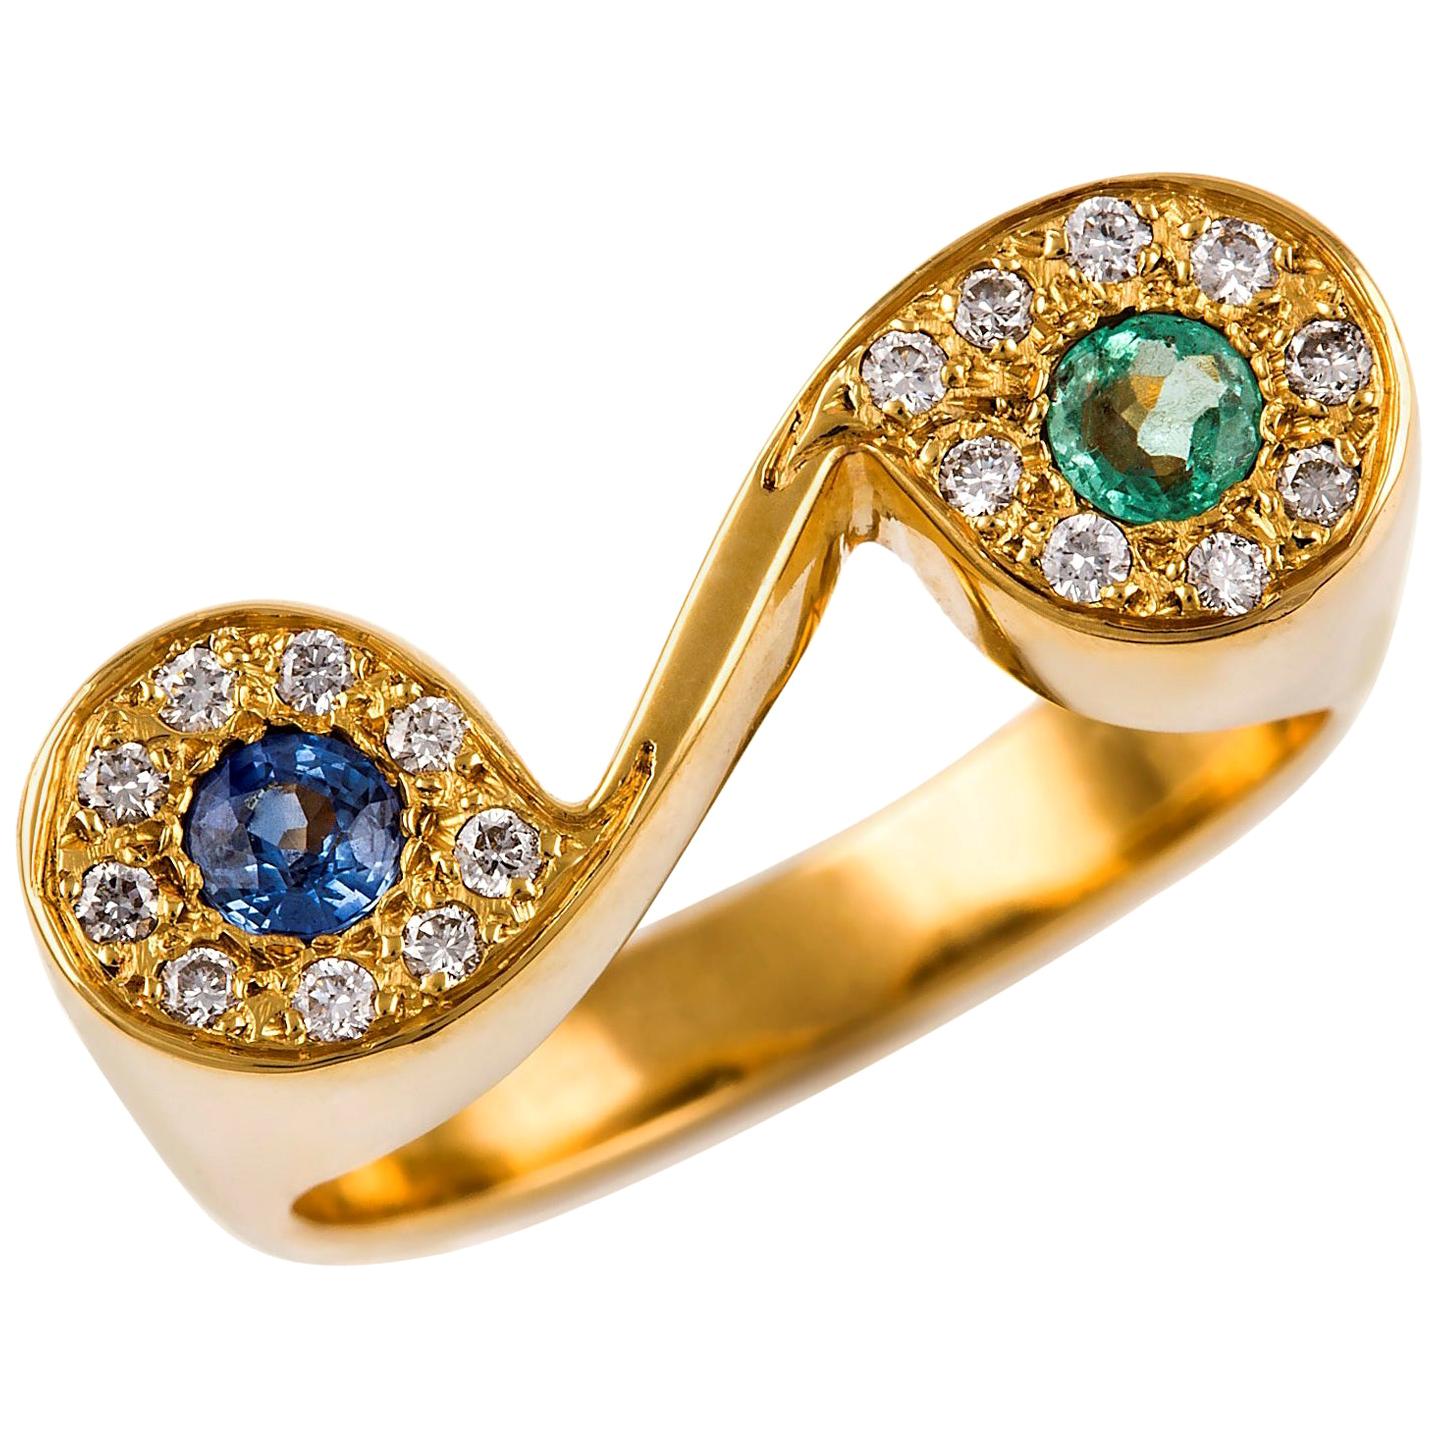 Kian Design Emerald, Sapphire and Diamond Cocktail Ring in 18 Carat Yellow Gold